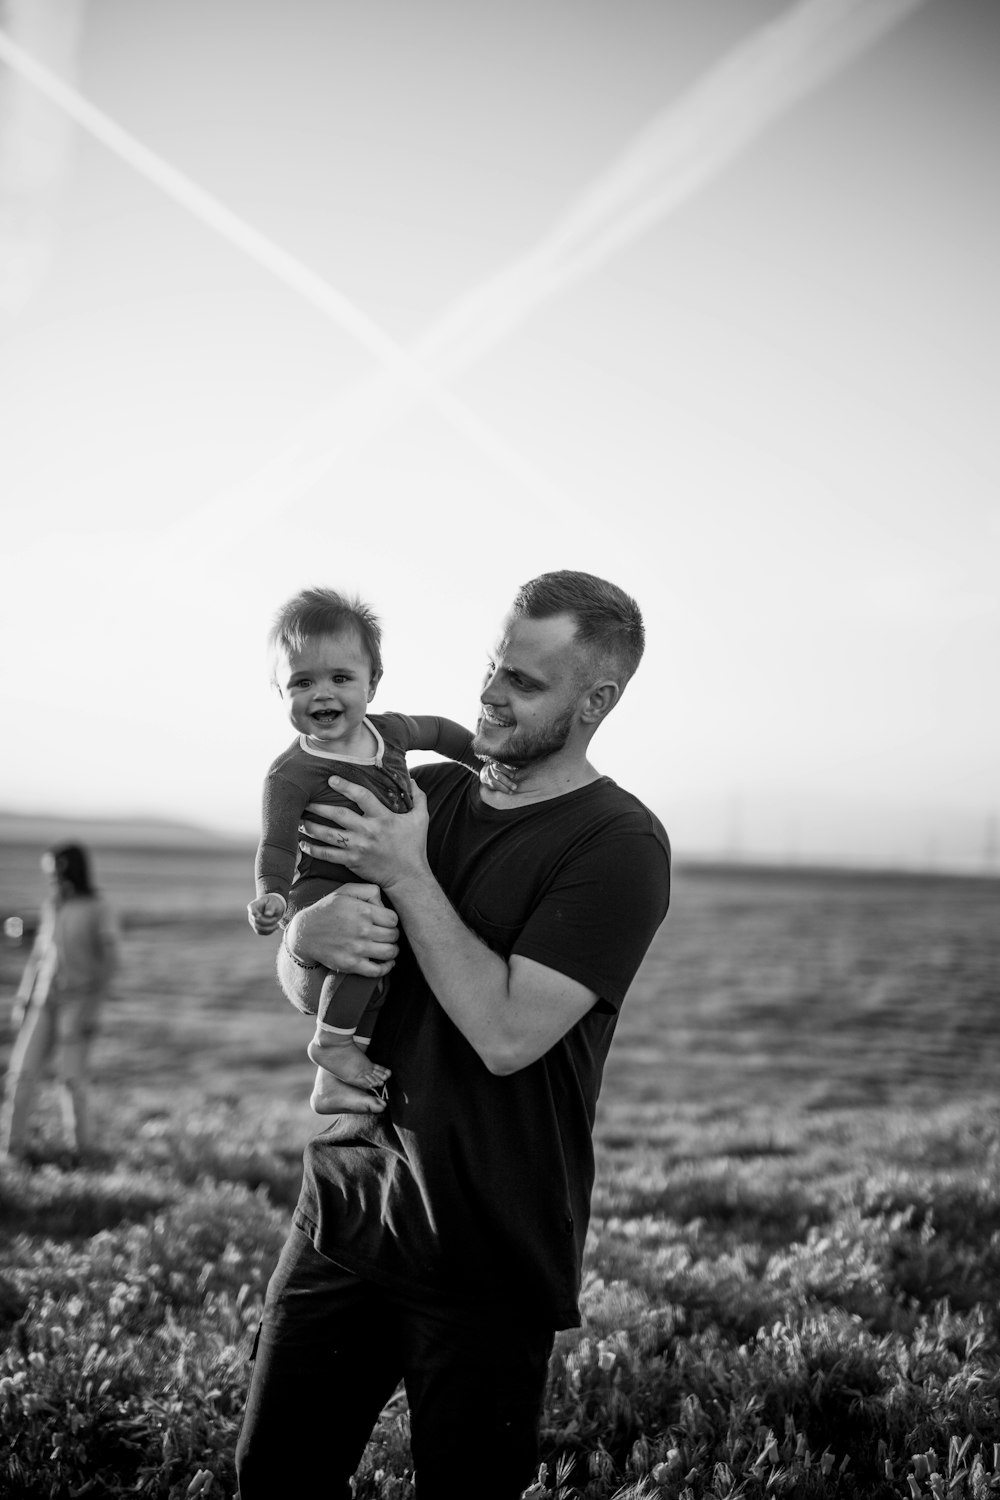 grayscale photo of man and boy standing on grass field